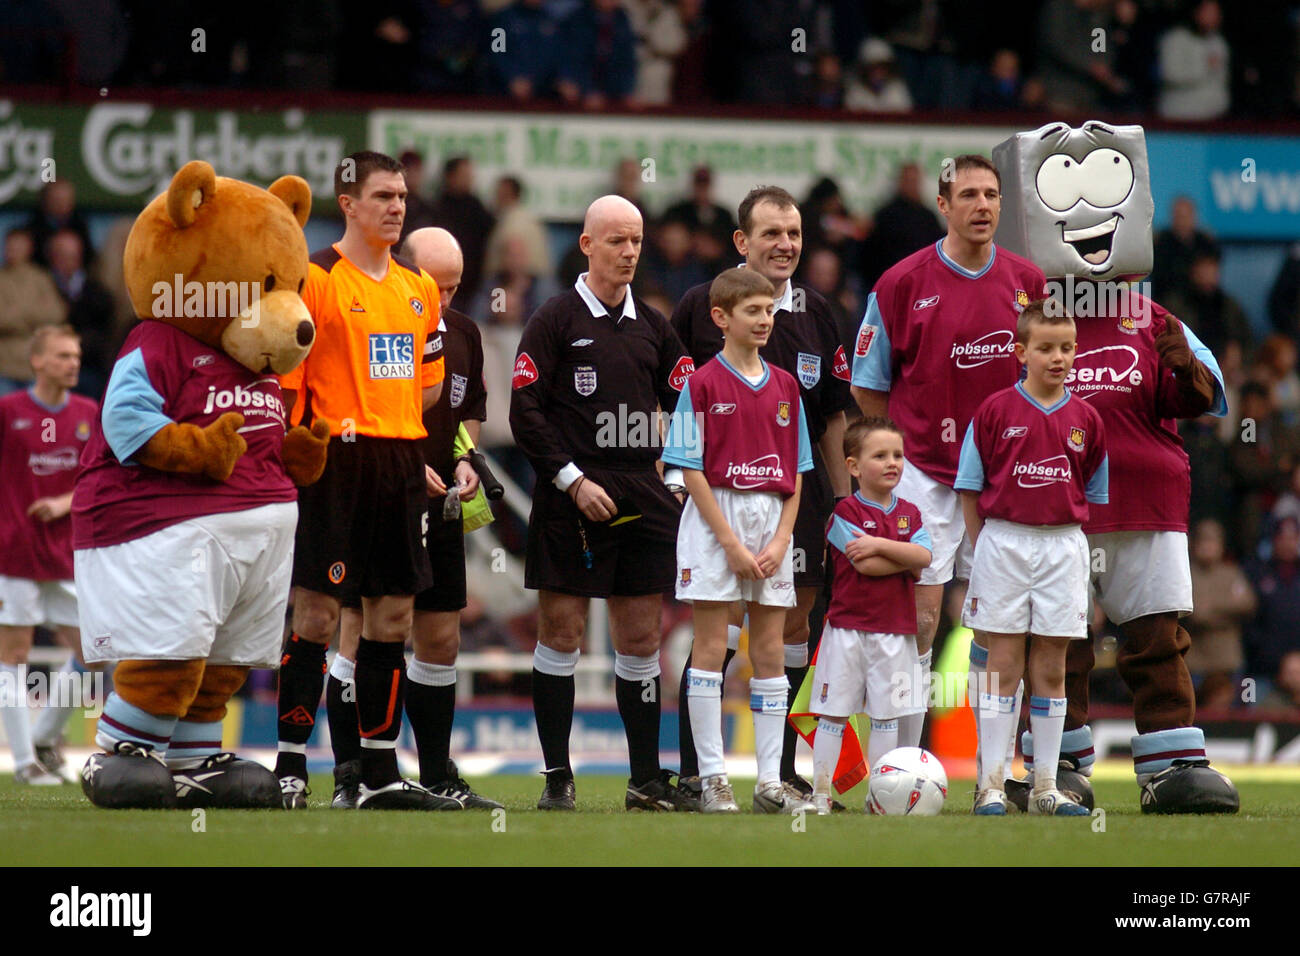 West Ham United's captain Malky Mackay (r) and Sheffield United's captain Chris Morgan line up with referee Dermot Gallagher (c) and their respective mascots Stock Photo